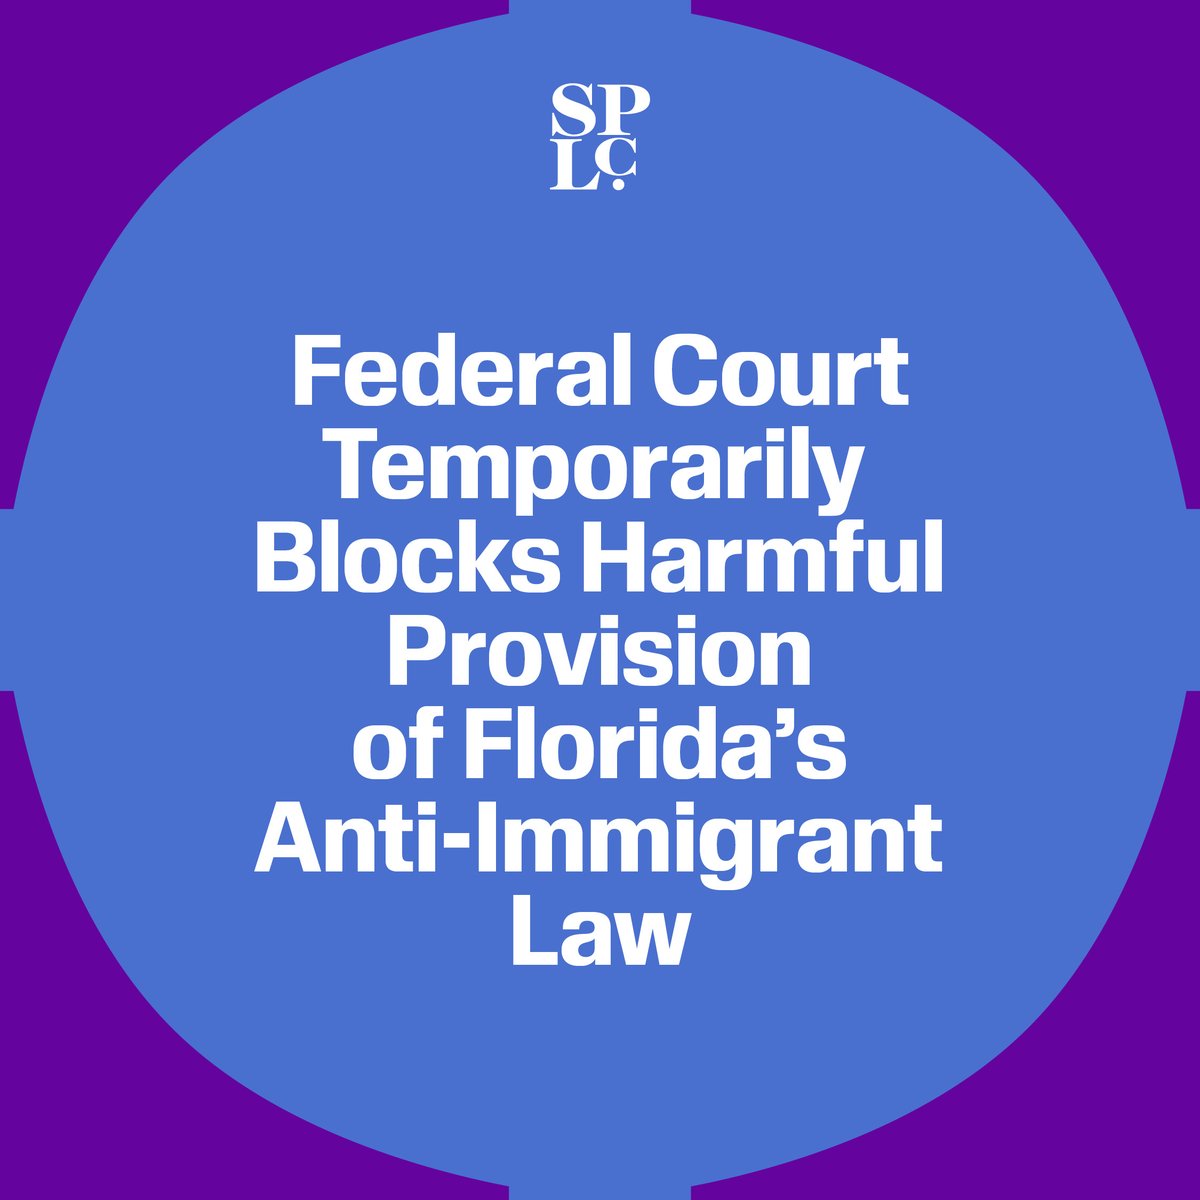 On Wednesday, a federal court blocked Section 10 of Florida’s draconian anti-immigrant law, SB 1718. Read the full statement: bit.ly/3wNVCO6